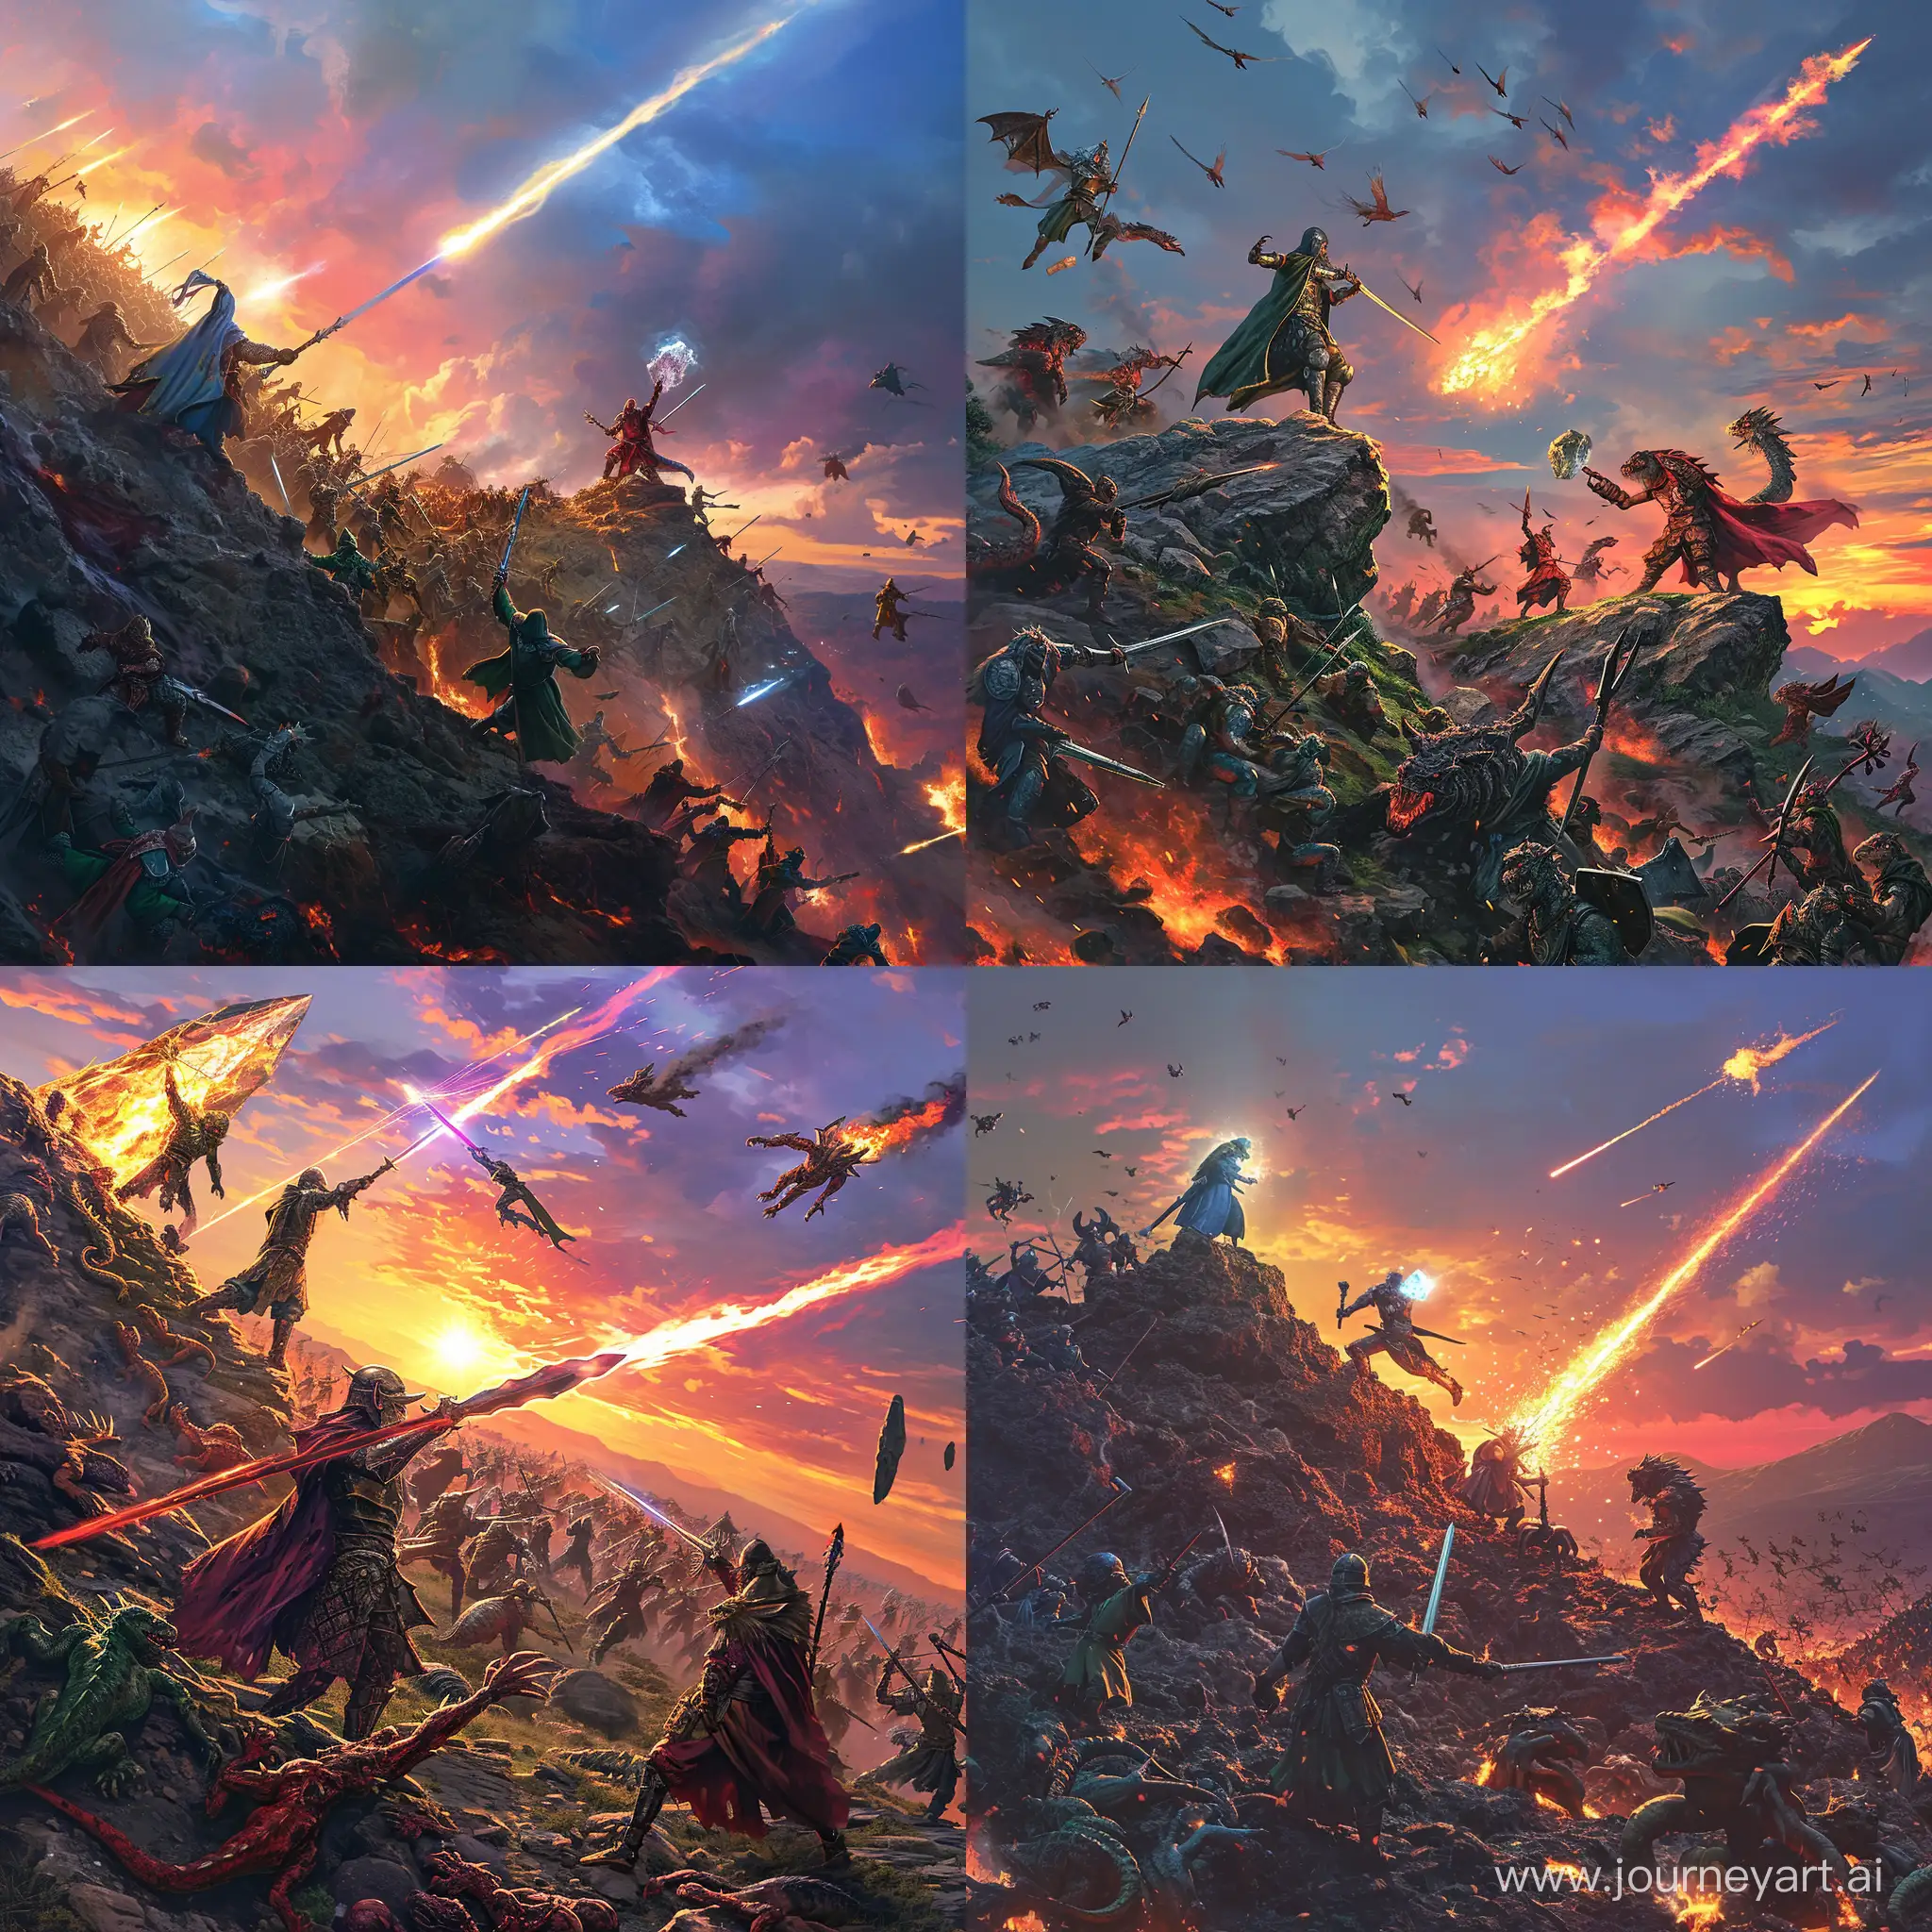 Epic-Battle-of-Crystal-Warriors-and-Fire-Demons-on-the-Hills